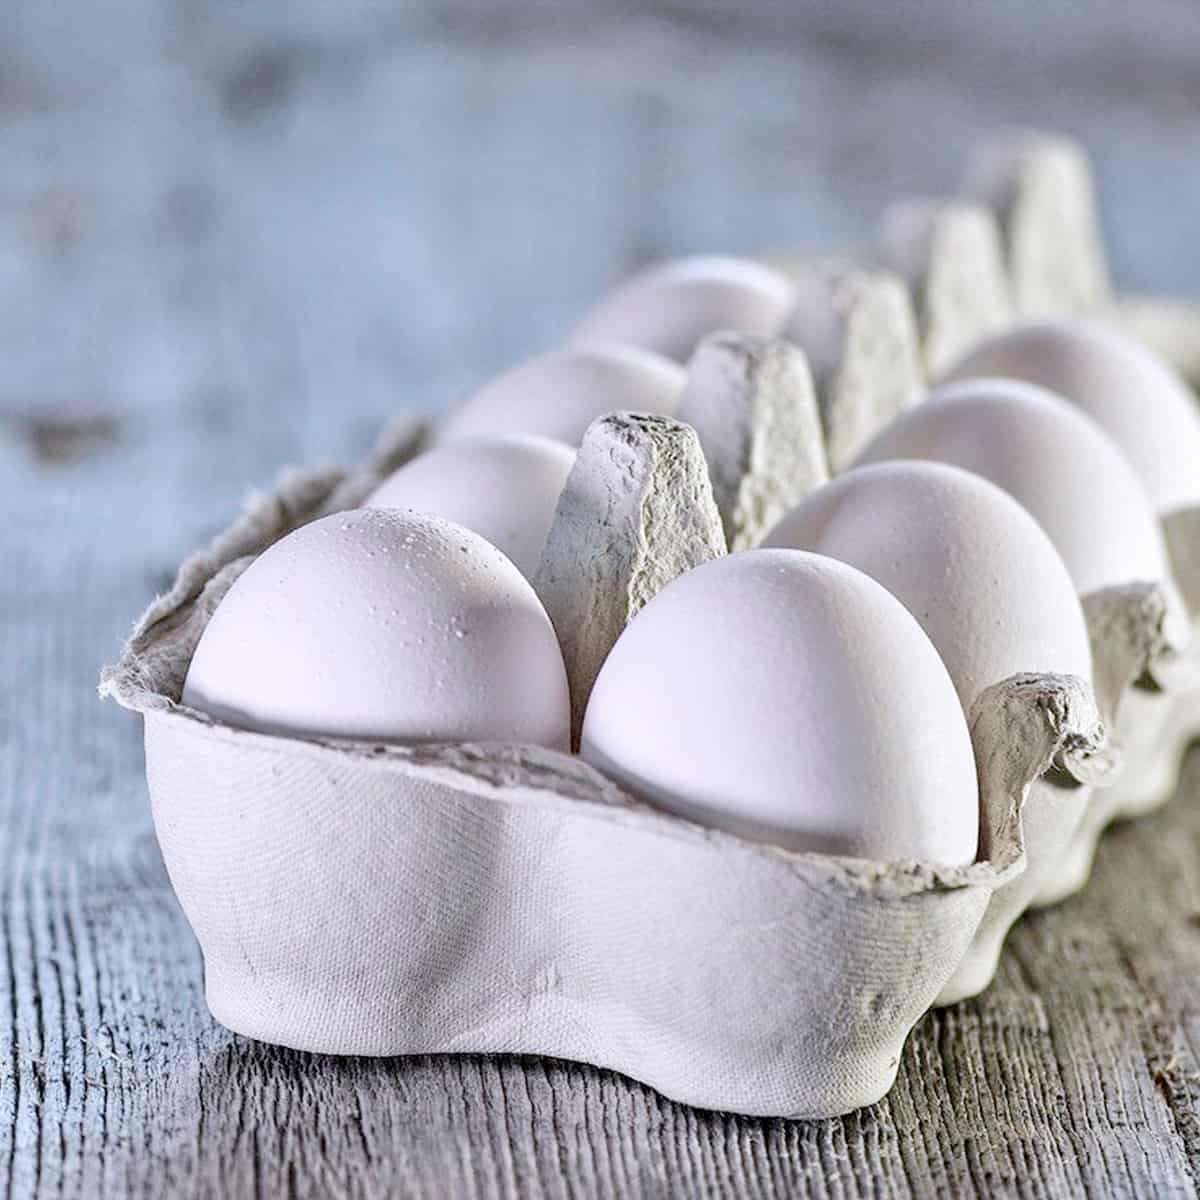 White eggs in a paper carton on a blue wooden surface